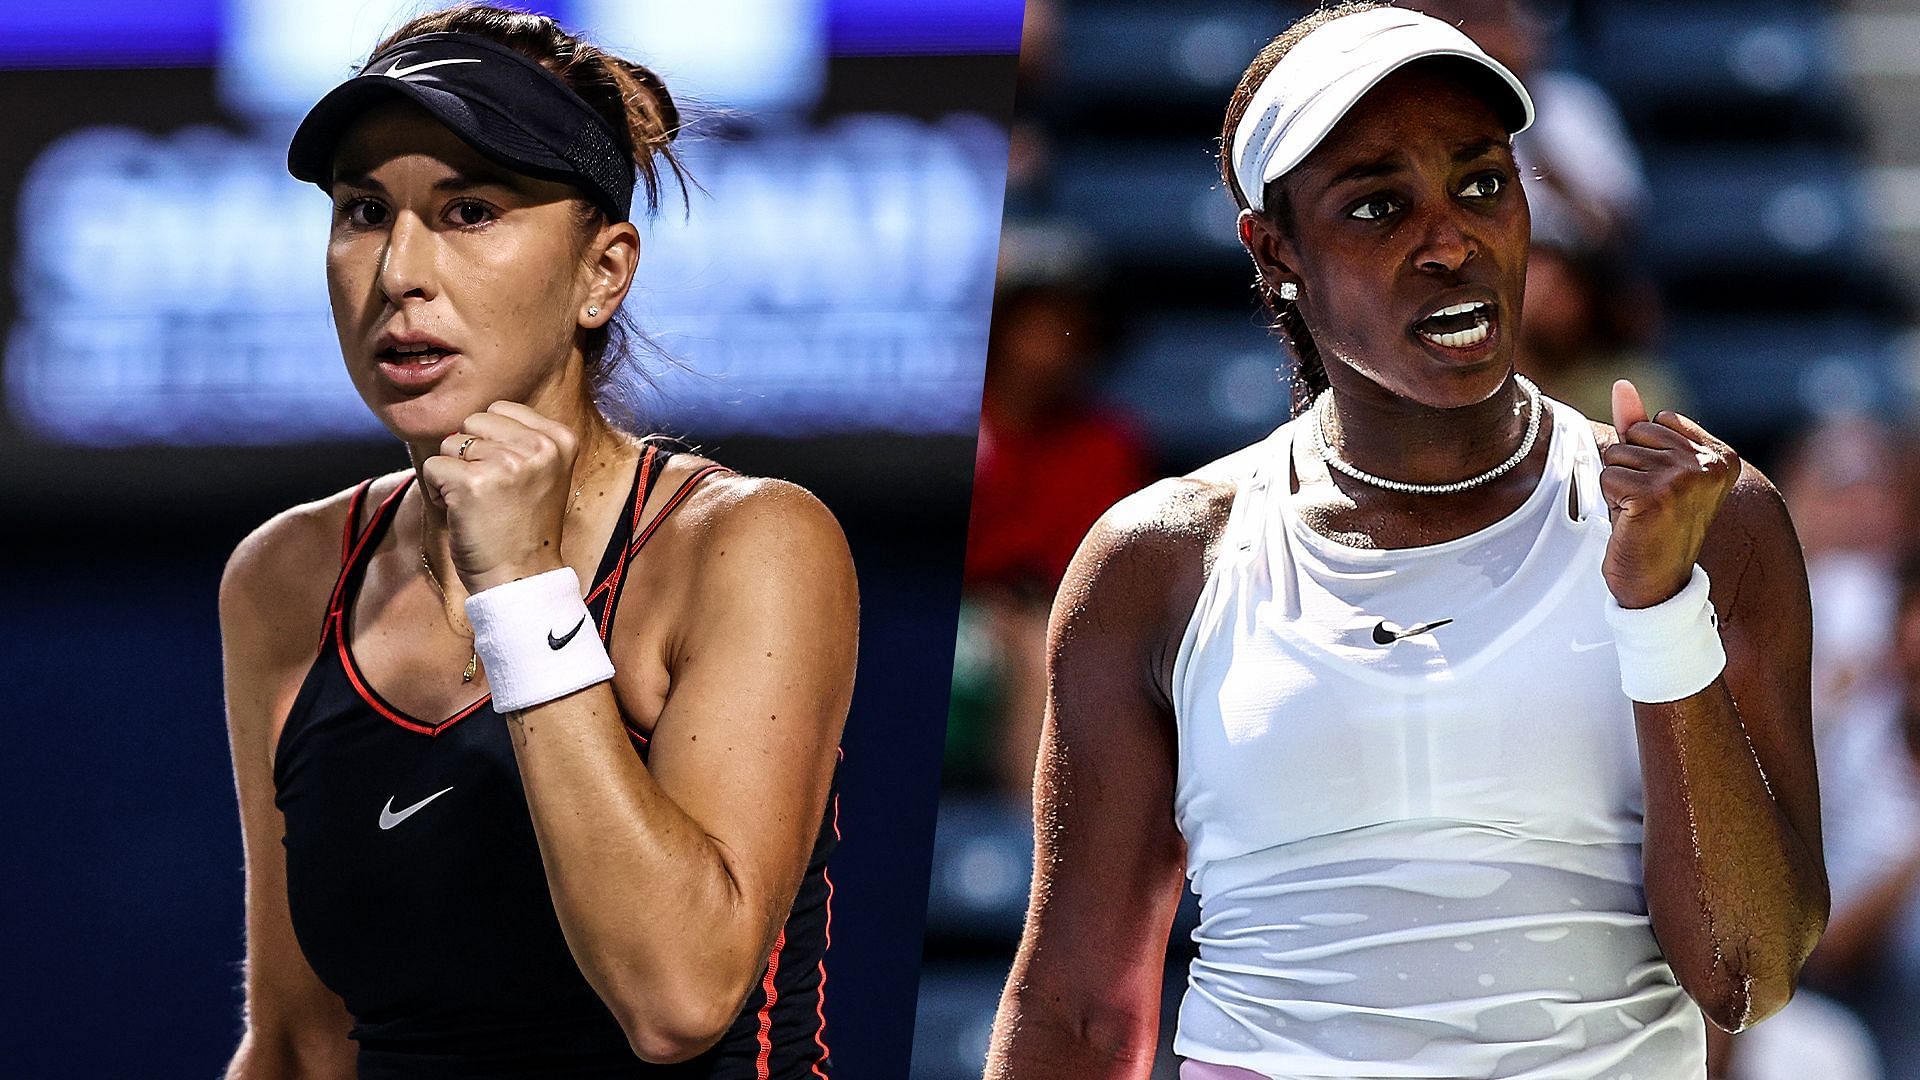 Belinda Bencic will face Sloane Stephens in the second round of the Guadalajara Open